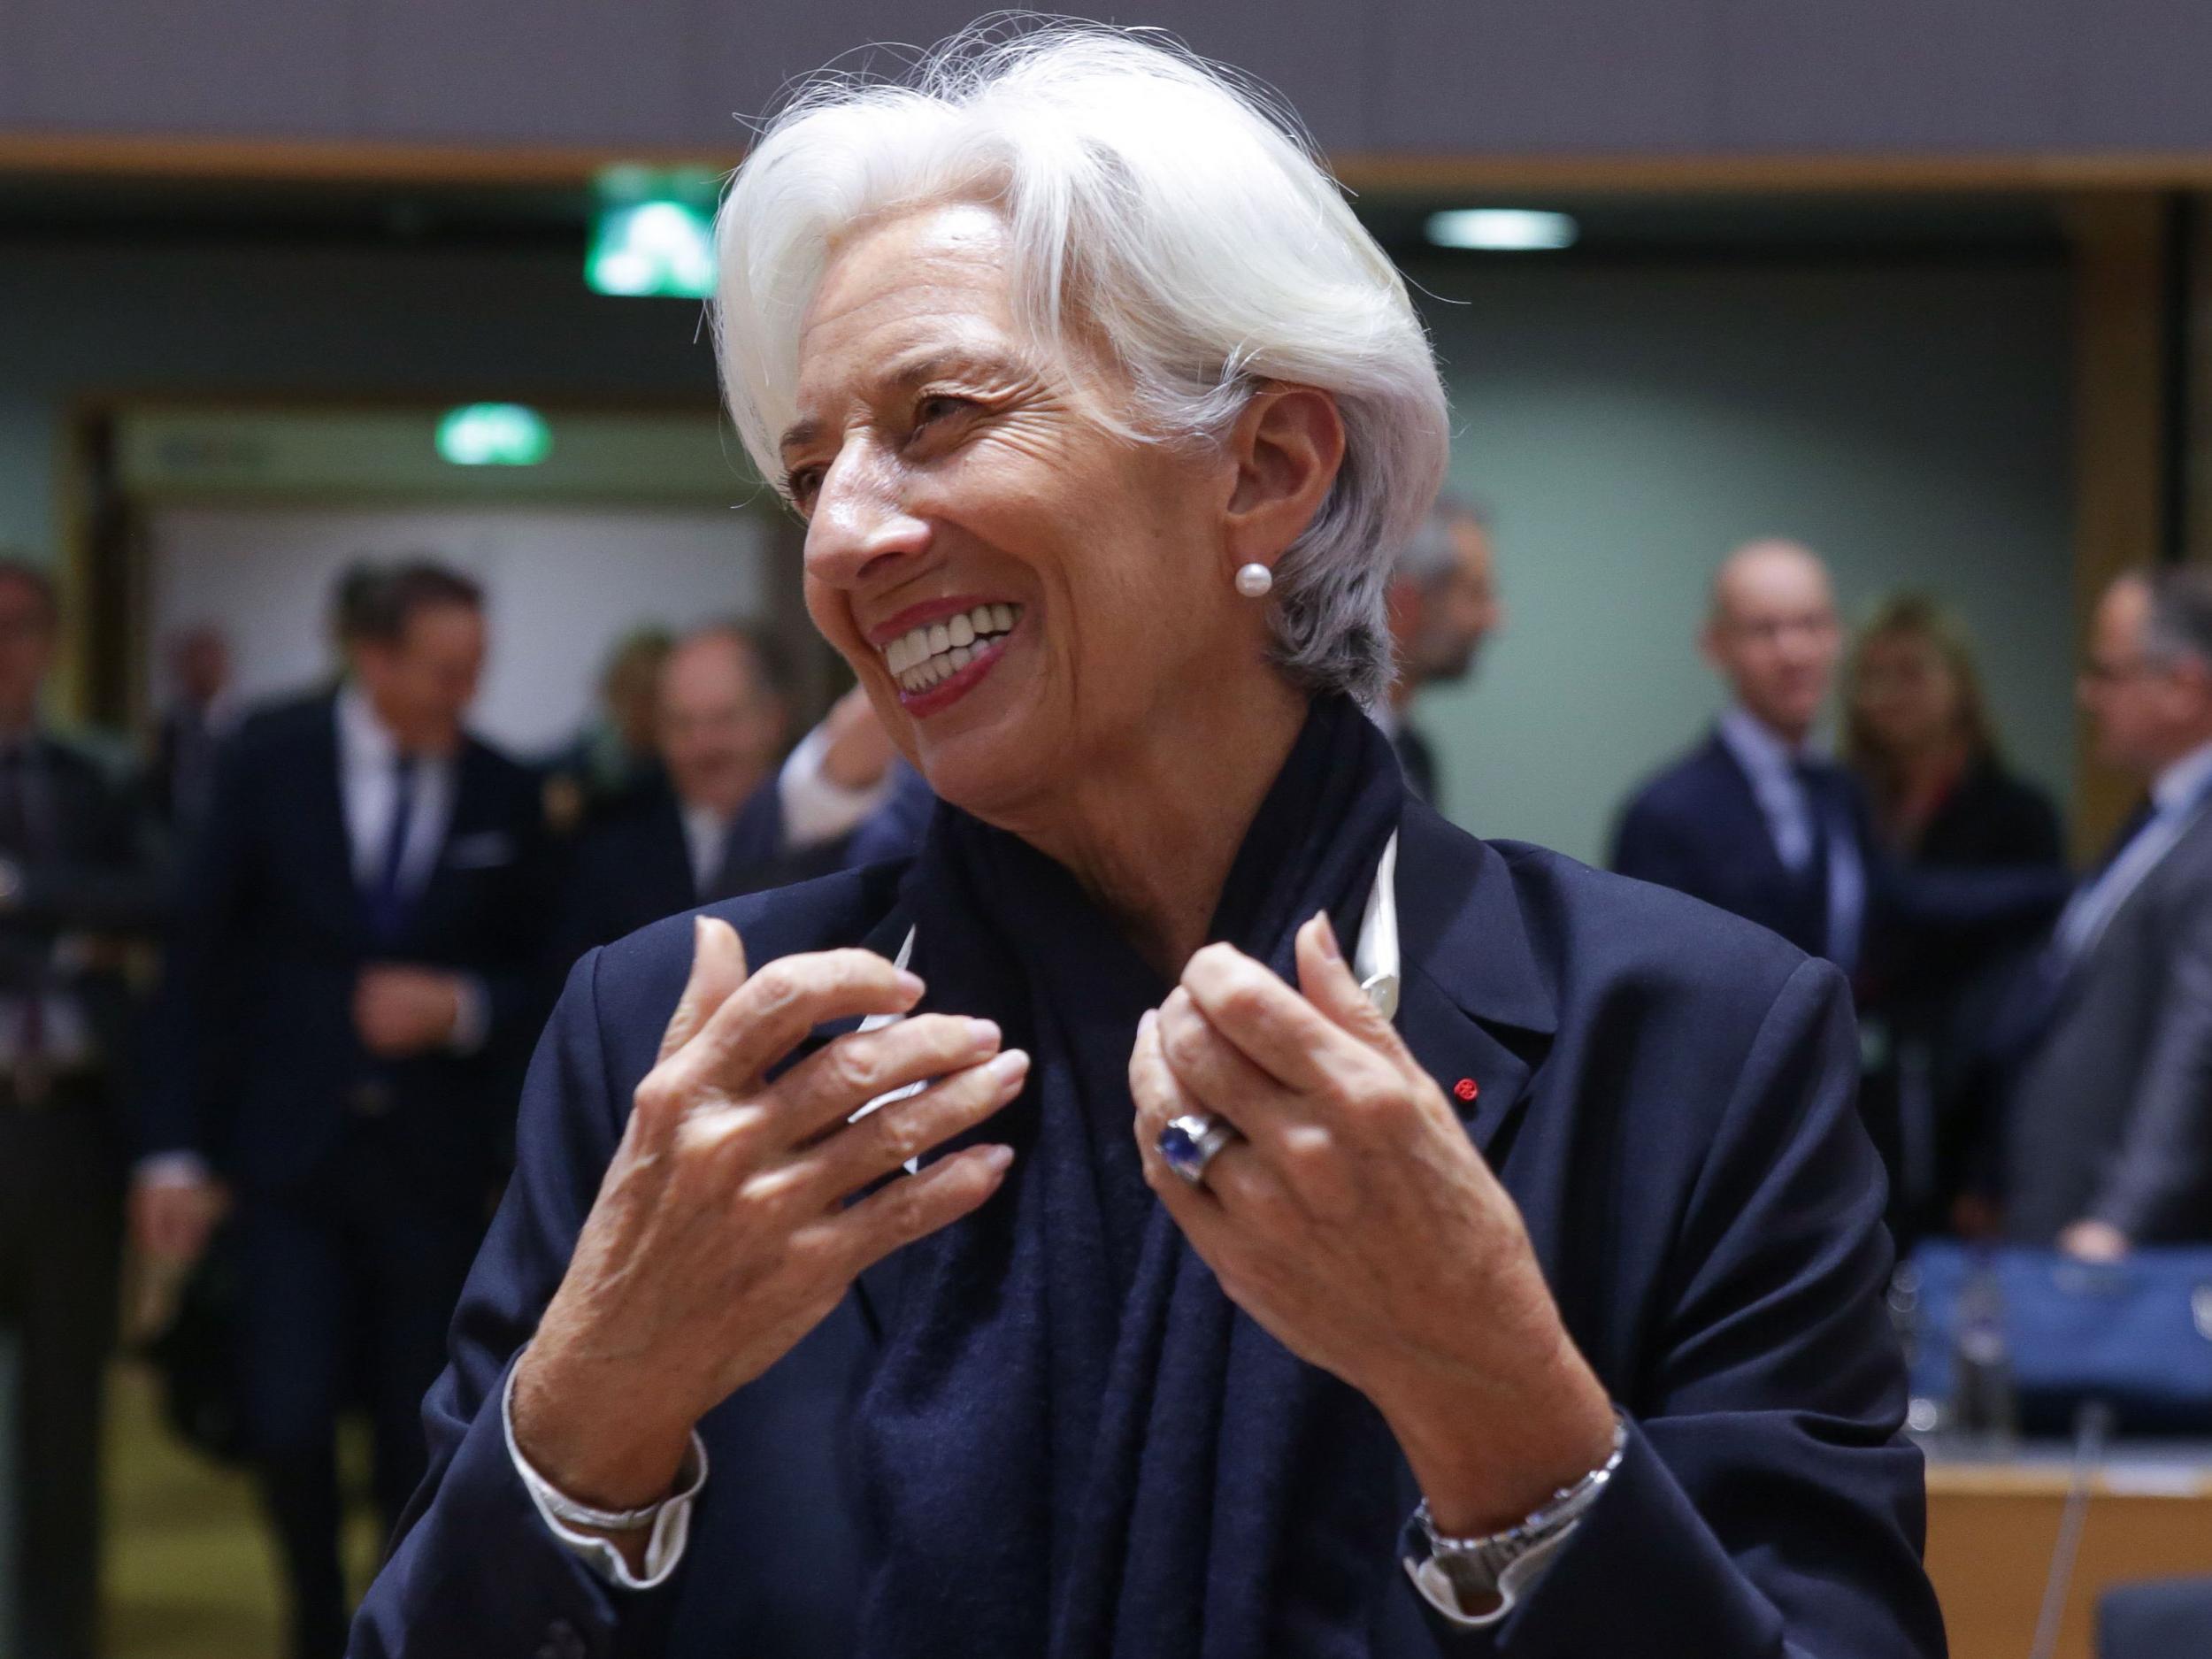 New ECB president Christine Lagarde at her first Eurogroup finance ministers meeting in Brussels on Thursday